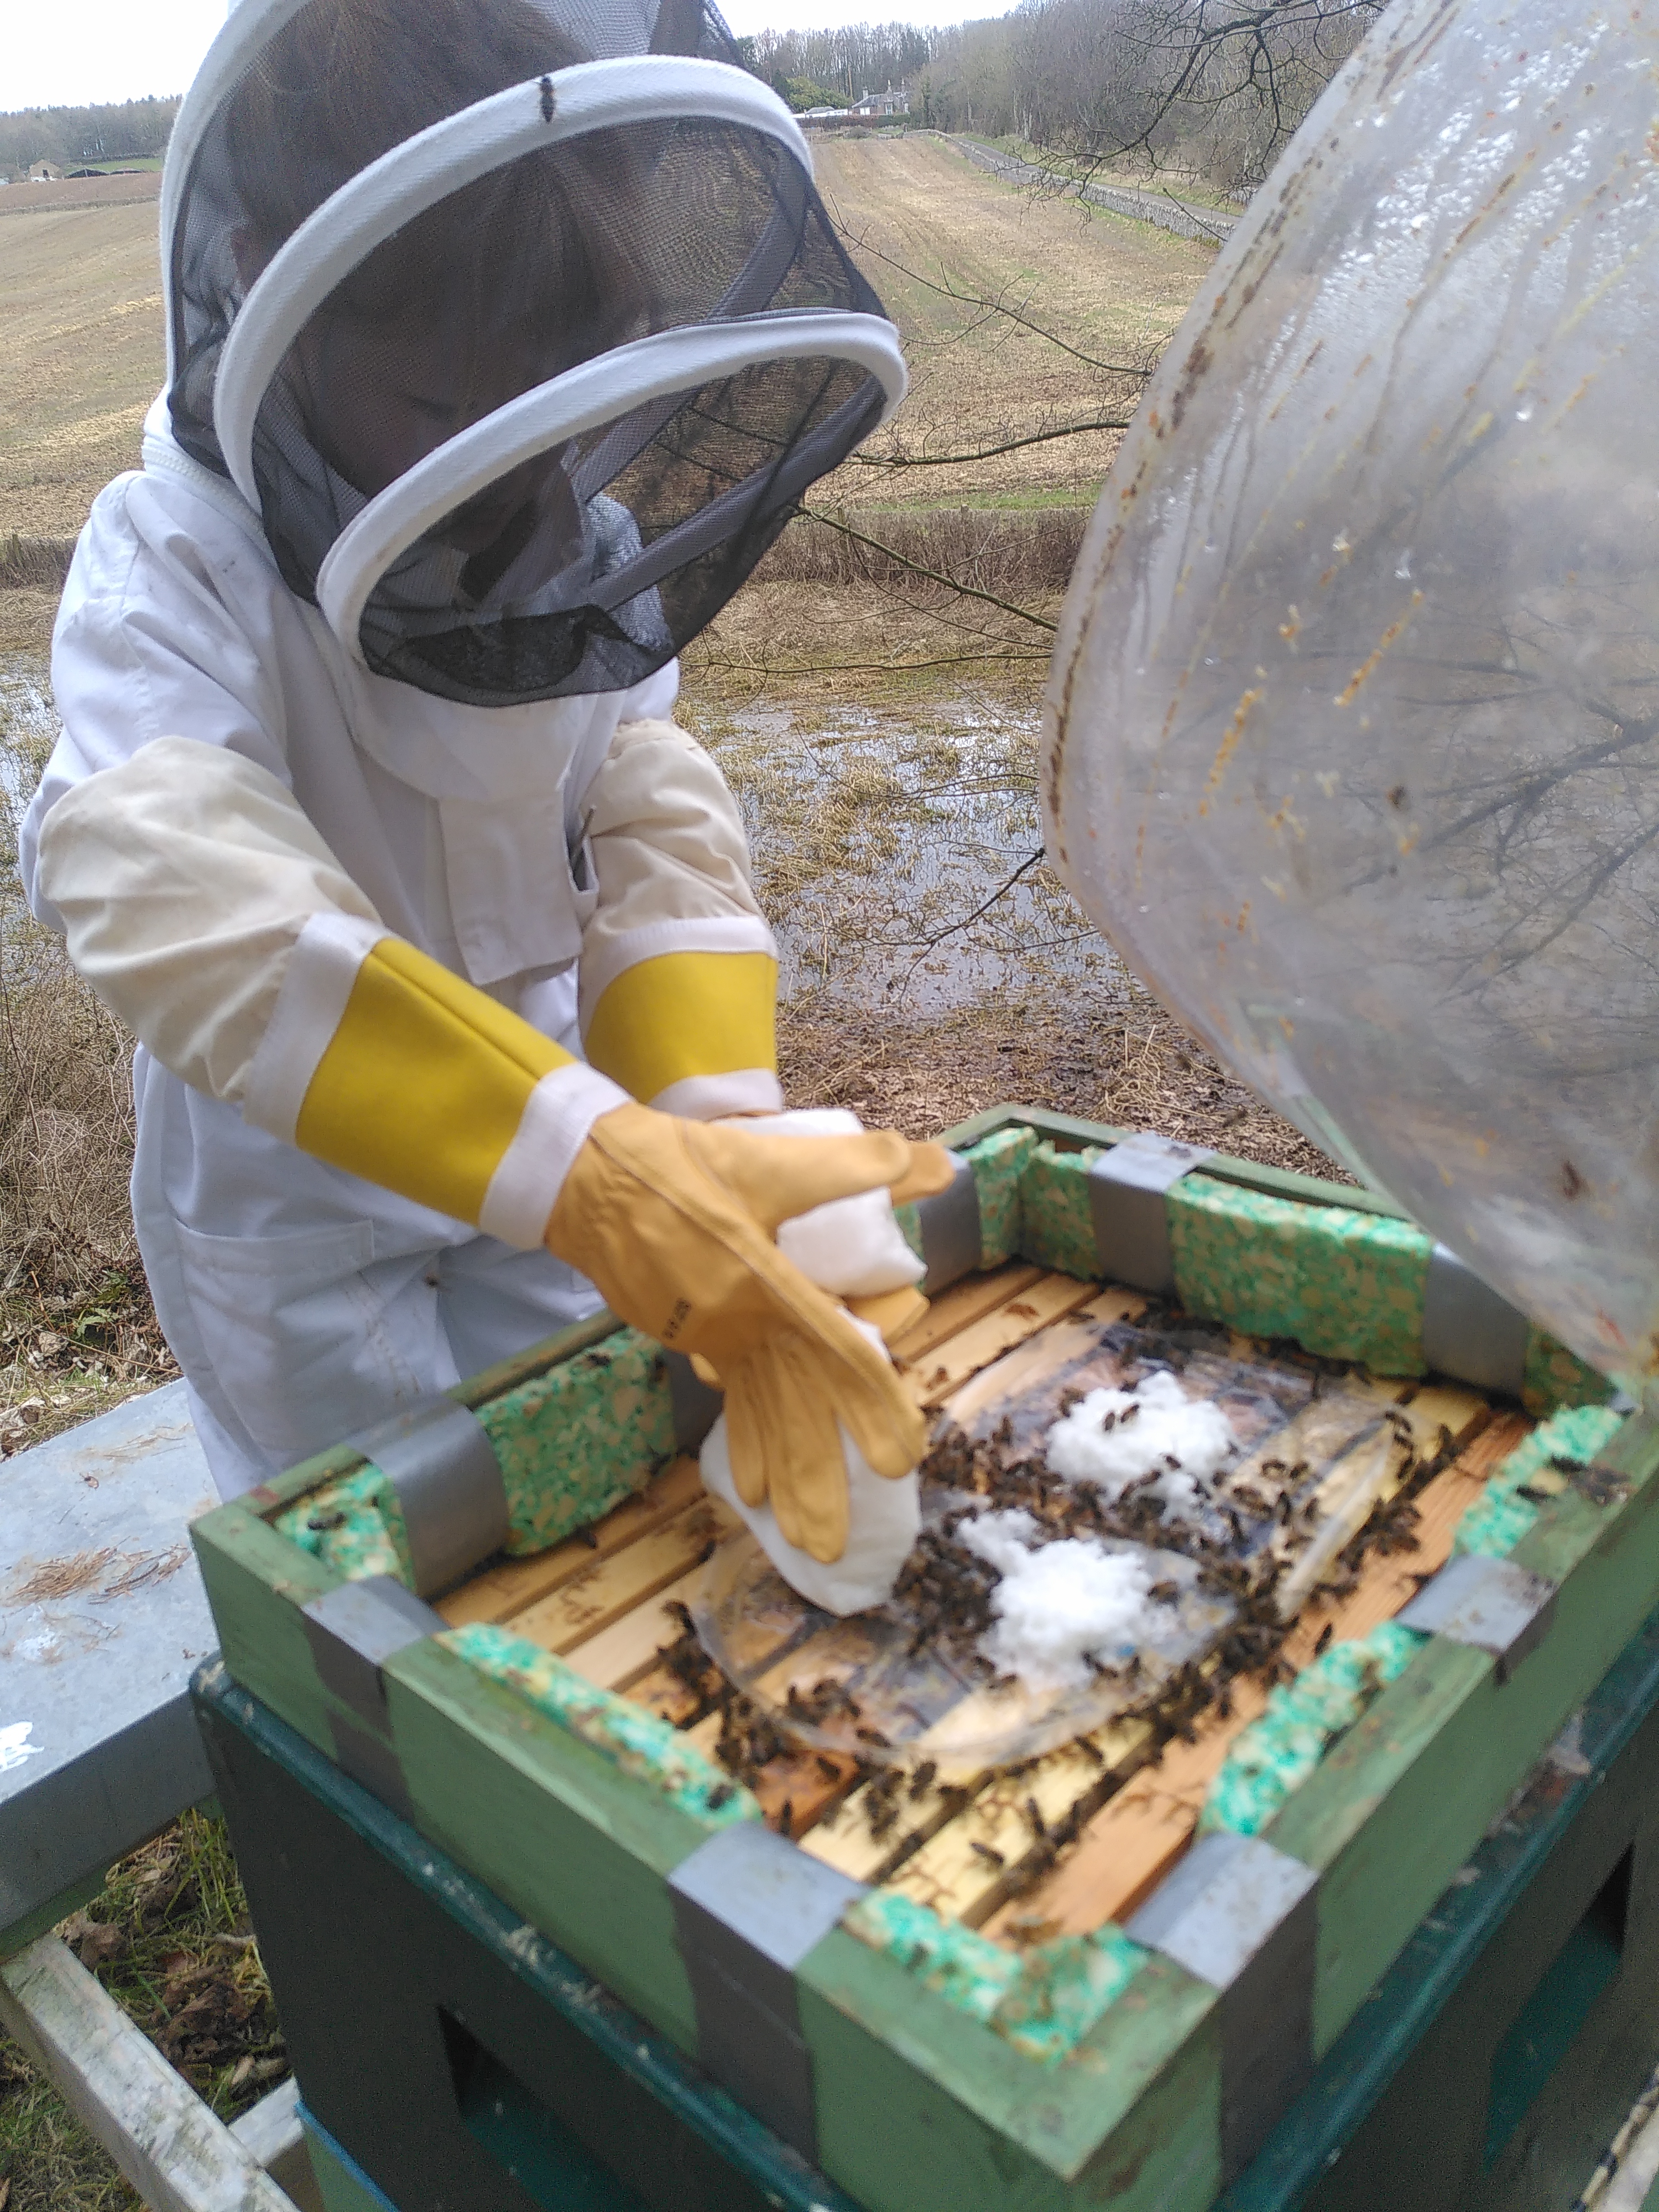 giving fondant to bees in winter